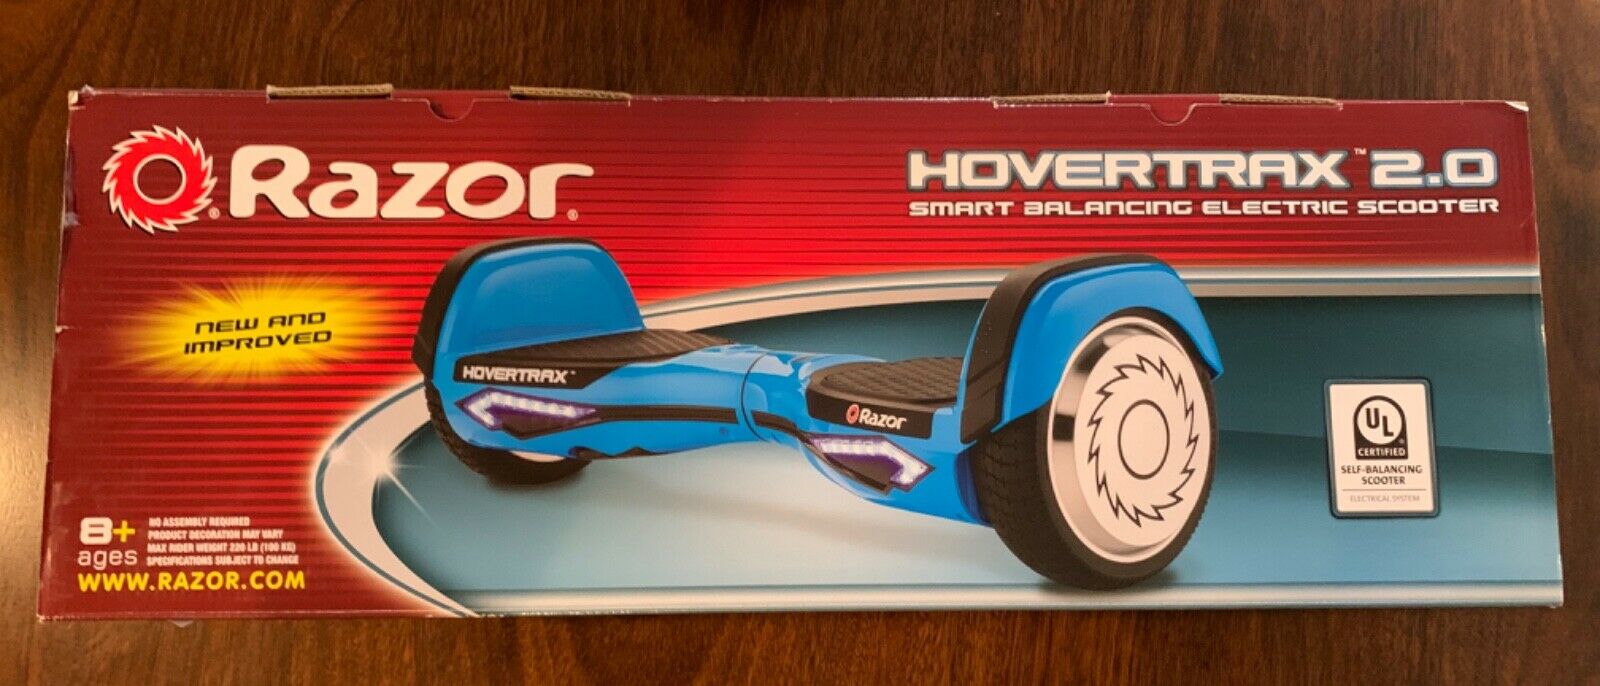 Razor Hovertrax 2.0 Self-Balancing Scooter Blue UL 2272 Certified - New in Box